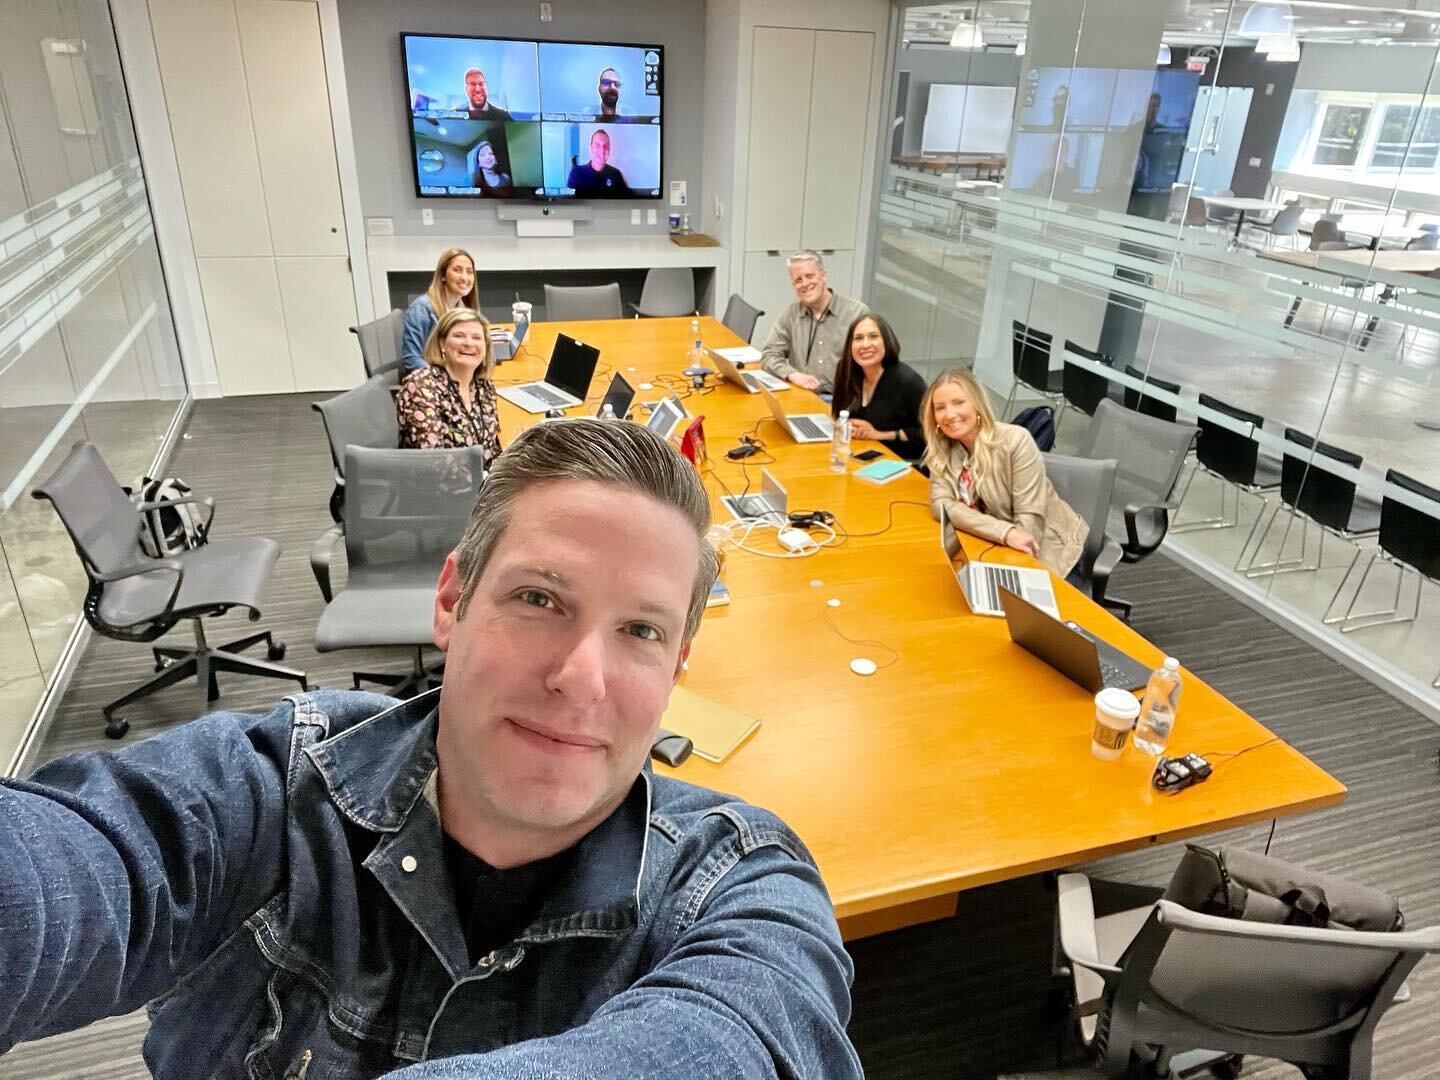 A full day of planning for the Blue Crew with some of the greatest agency partners in the game. Being with these guys somehow makes the chaos reasonable and fun. #bluecrew #iamvz